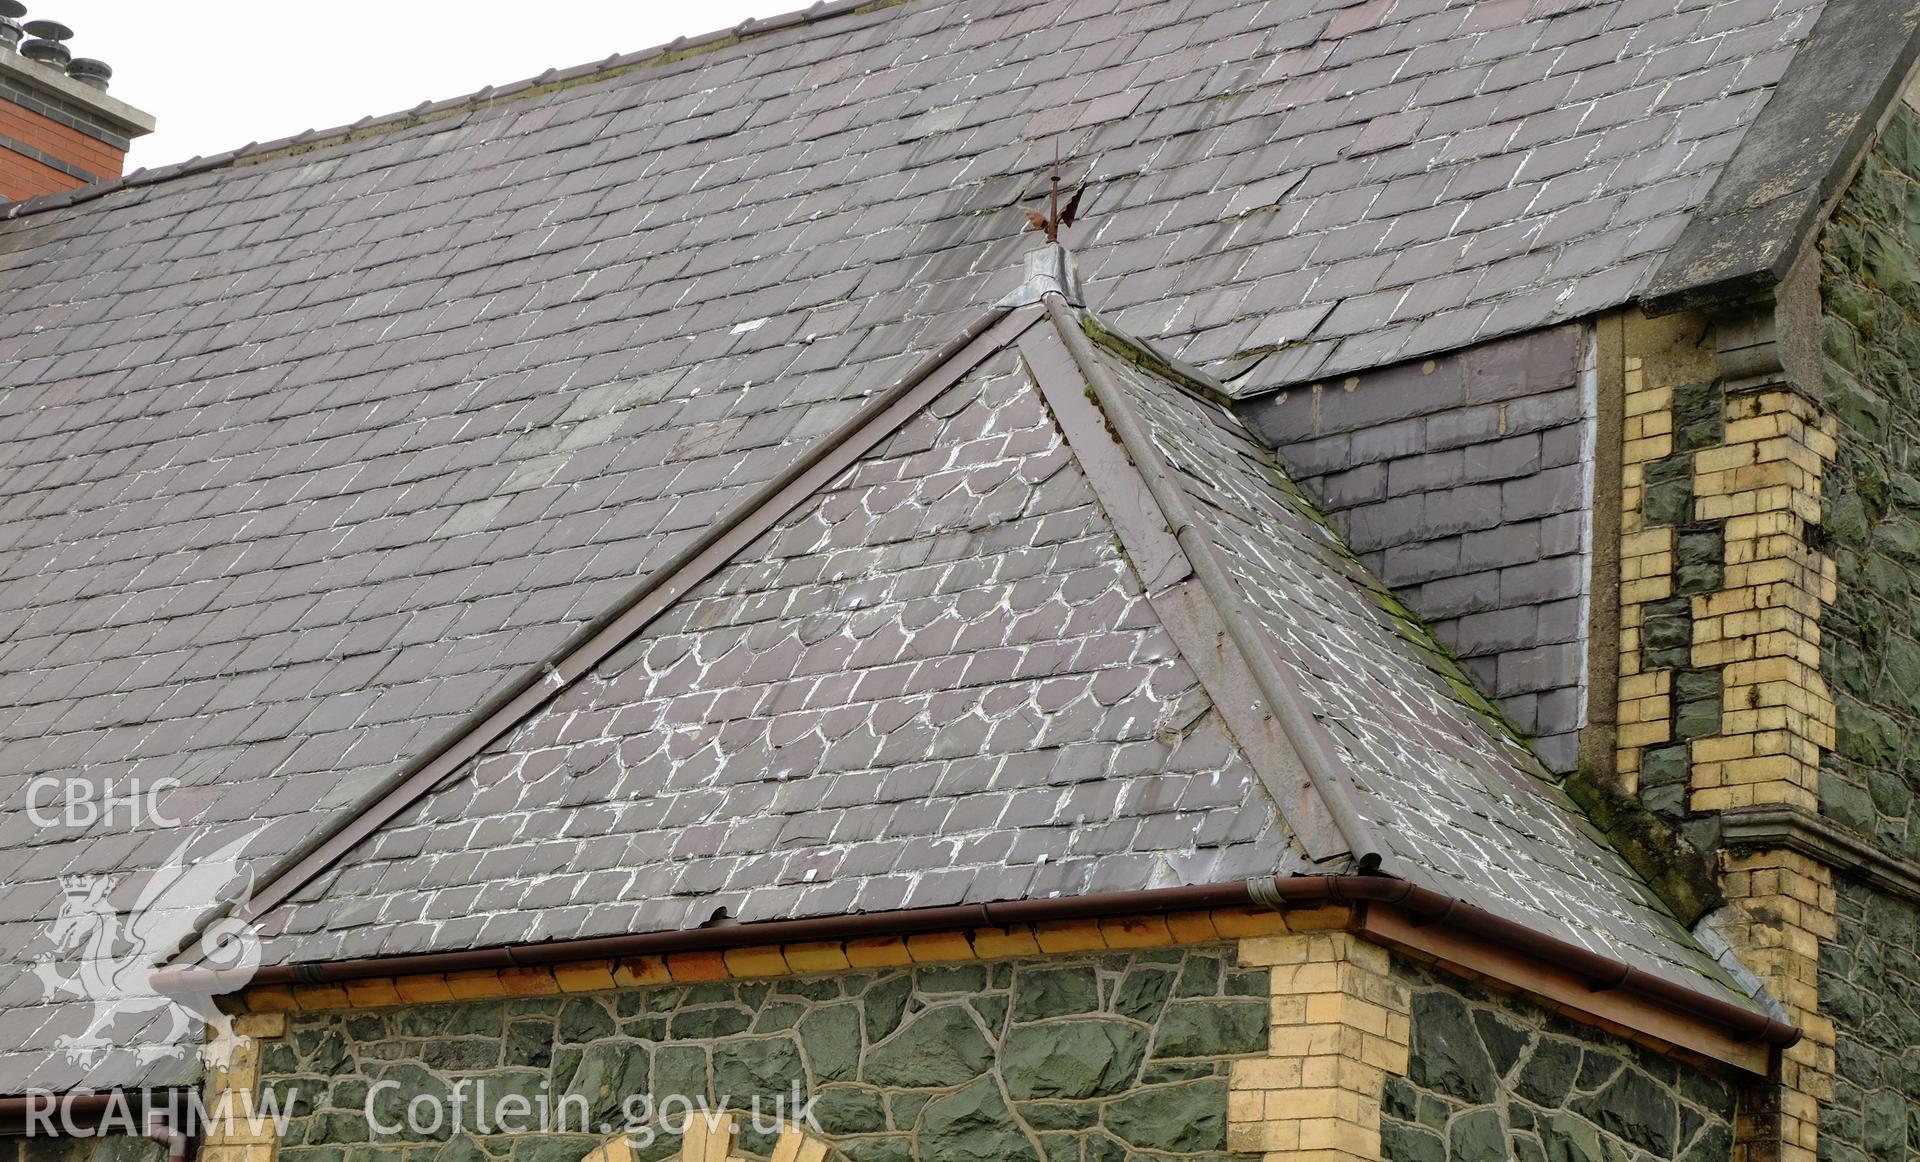 Colour photograph showing detail of roof slates at Capel Libanus, Clwt-y-Bont, Deiniolen, produced by Richard Hayman 2nd March 2017